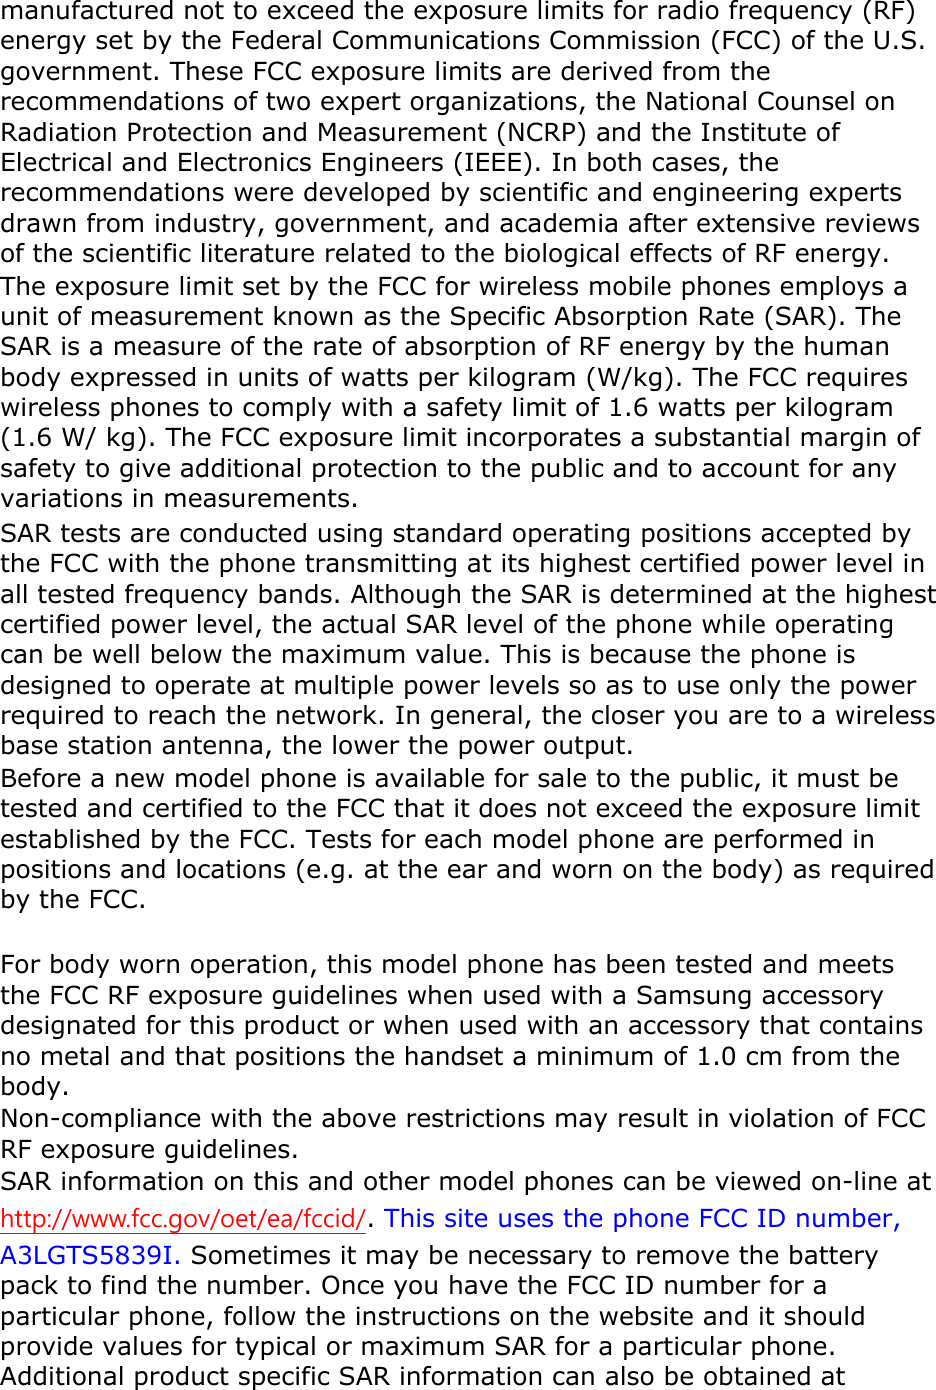 manufactured not to exceed the exposure limits for radio frequency (RF) energy set by the Federal Communications Commission (FCC) of the U.S. government. These FCC exposure limits are derived from the recommendations of two expert organizations, the National Counsel on Radiation Protection and Measurement (NCRP) and the Institute of Electrical and Electronics Engineers (IEEE). In both cases, the recommendations were developed by scientific and engineering experts drawn from industry, government, and academia after extensive reviews of the scientific literature related to the biological effects of RF energy. The exposure limit set by the FCC for wireless mobile phones employs a unit of measurement known as the Specific Absorption Rate (SAR). The SAR is a measure of the rate of absorption of RF energy by the human body expressed in units of watts per kilogram (W/kg). The FCC requires wireless phones to comply with a safety limit of 1.6 watts per kilogram (1.6 W/ kg). The FCC exposure limit incorporates a substantial margin of safety to give additional protection to the public and to account for any variations in measurements. SAR tests are conducted using standard operating positions accepted by the FCC with the phone transmitting at its highest certified power level in all tested frequency bands. Although the SAR is determined at the highest certified power level, the actual SAR level of the phone while operating can be well below the maximum value. This is because the phone is designed to operate at multiple power levels so as to use only the power required to reach the network. In general, the closer you are to a wireless base station antenna, the lower the power output. Before a new model phone is available for sale to the public, it must be tested and certified to the FCC that it does not exceed the exposure limit established by the FCC. Tests for each model phone are performed in positions and locations (e.g. at the ear and worn on the body) as required by the FCC.      For body worn operation, this model phone has been tested and meets the FCC RF exposure guidelines when used with a Samsung accessory designated for this product or when used with an accessory that contains no metal and that positions the handset a minimum of 1.0 cm from the body.   Non-compliance with the above restrictions may result in violation of FCC RF exposure guidelines. SAR information on this and other model phones can be viewed on-line at http://www.fcc.gov/oet/ea/fccid/. This site uses the phone FCC ID number, A3LGTS5839I. Sometimes it may be necessary to remove the battery pack to find the number. Once you have the FCC ID number for a particular phone, follow the instructions on the website and it should provide values for typical or maximum SAR for a particular phone. Additional product specific SAR information can also be obtained at 